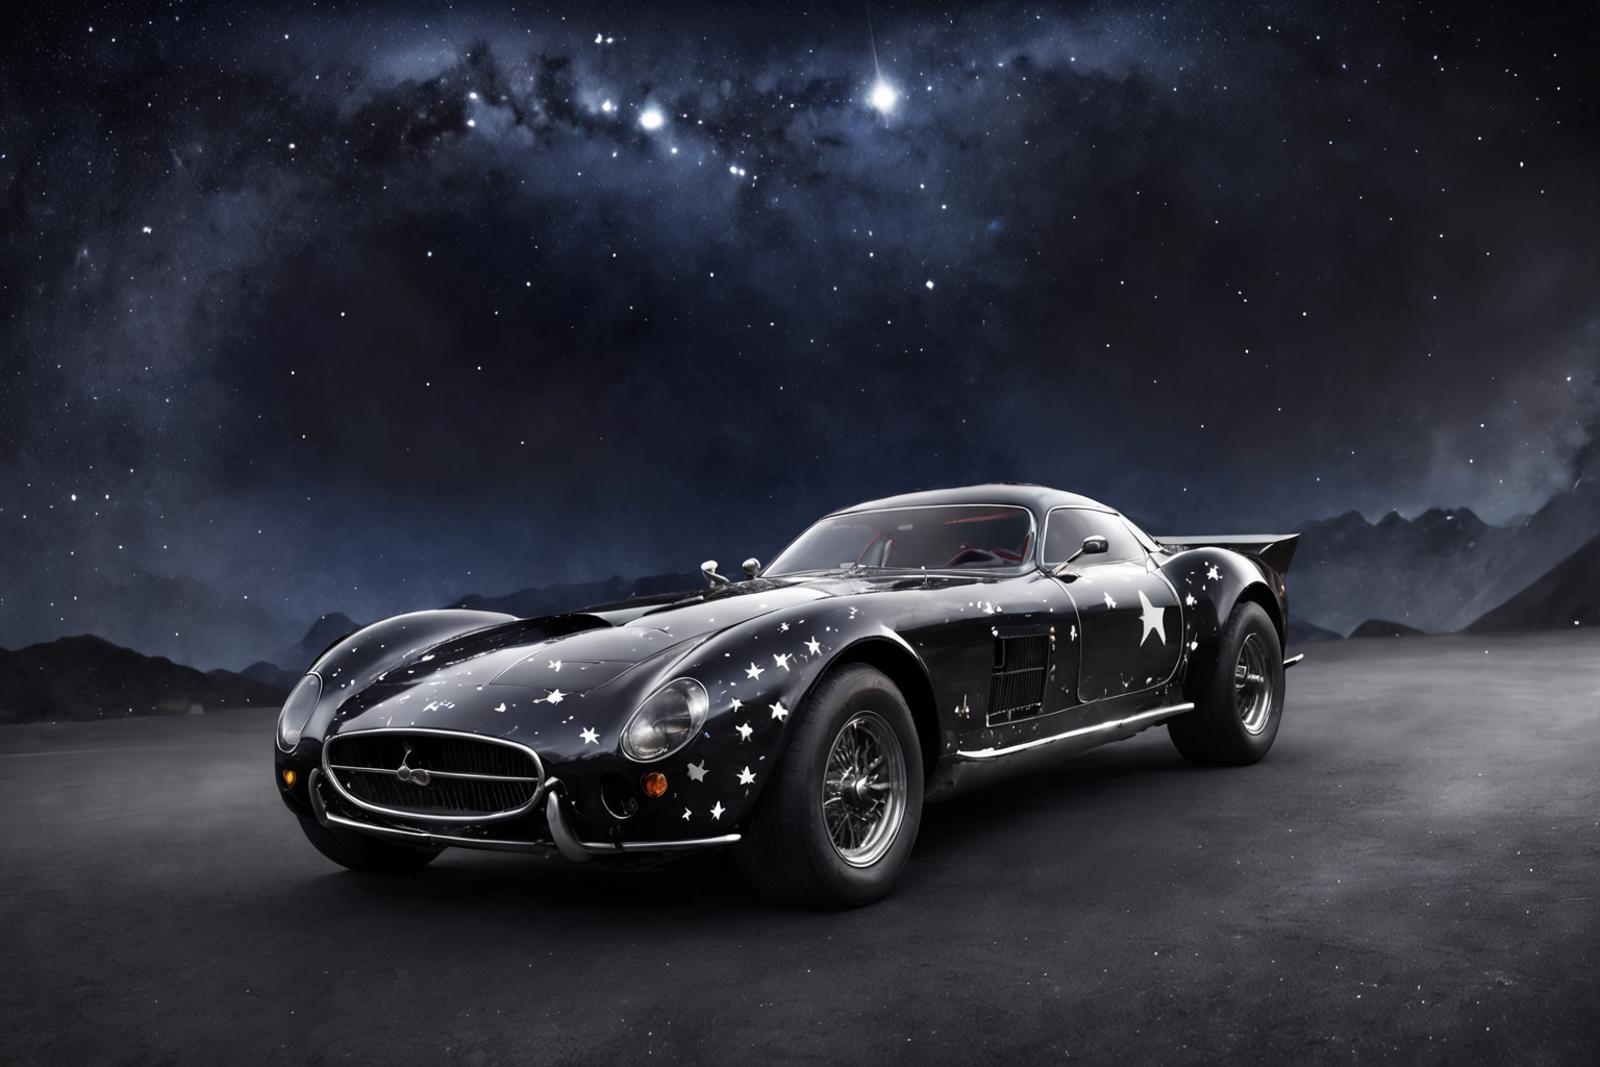 A black sports car with stars on the hood sitting on a dark road.